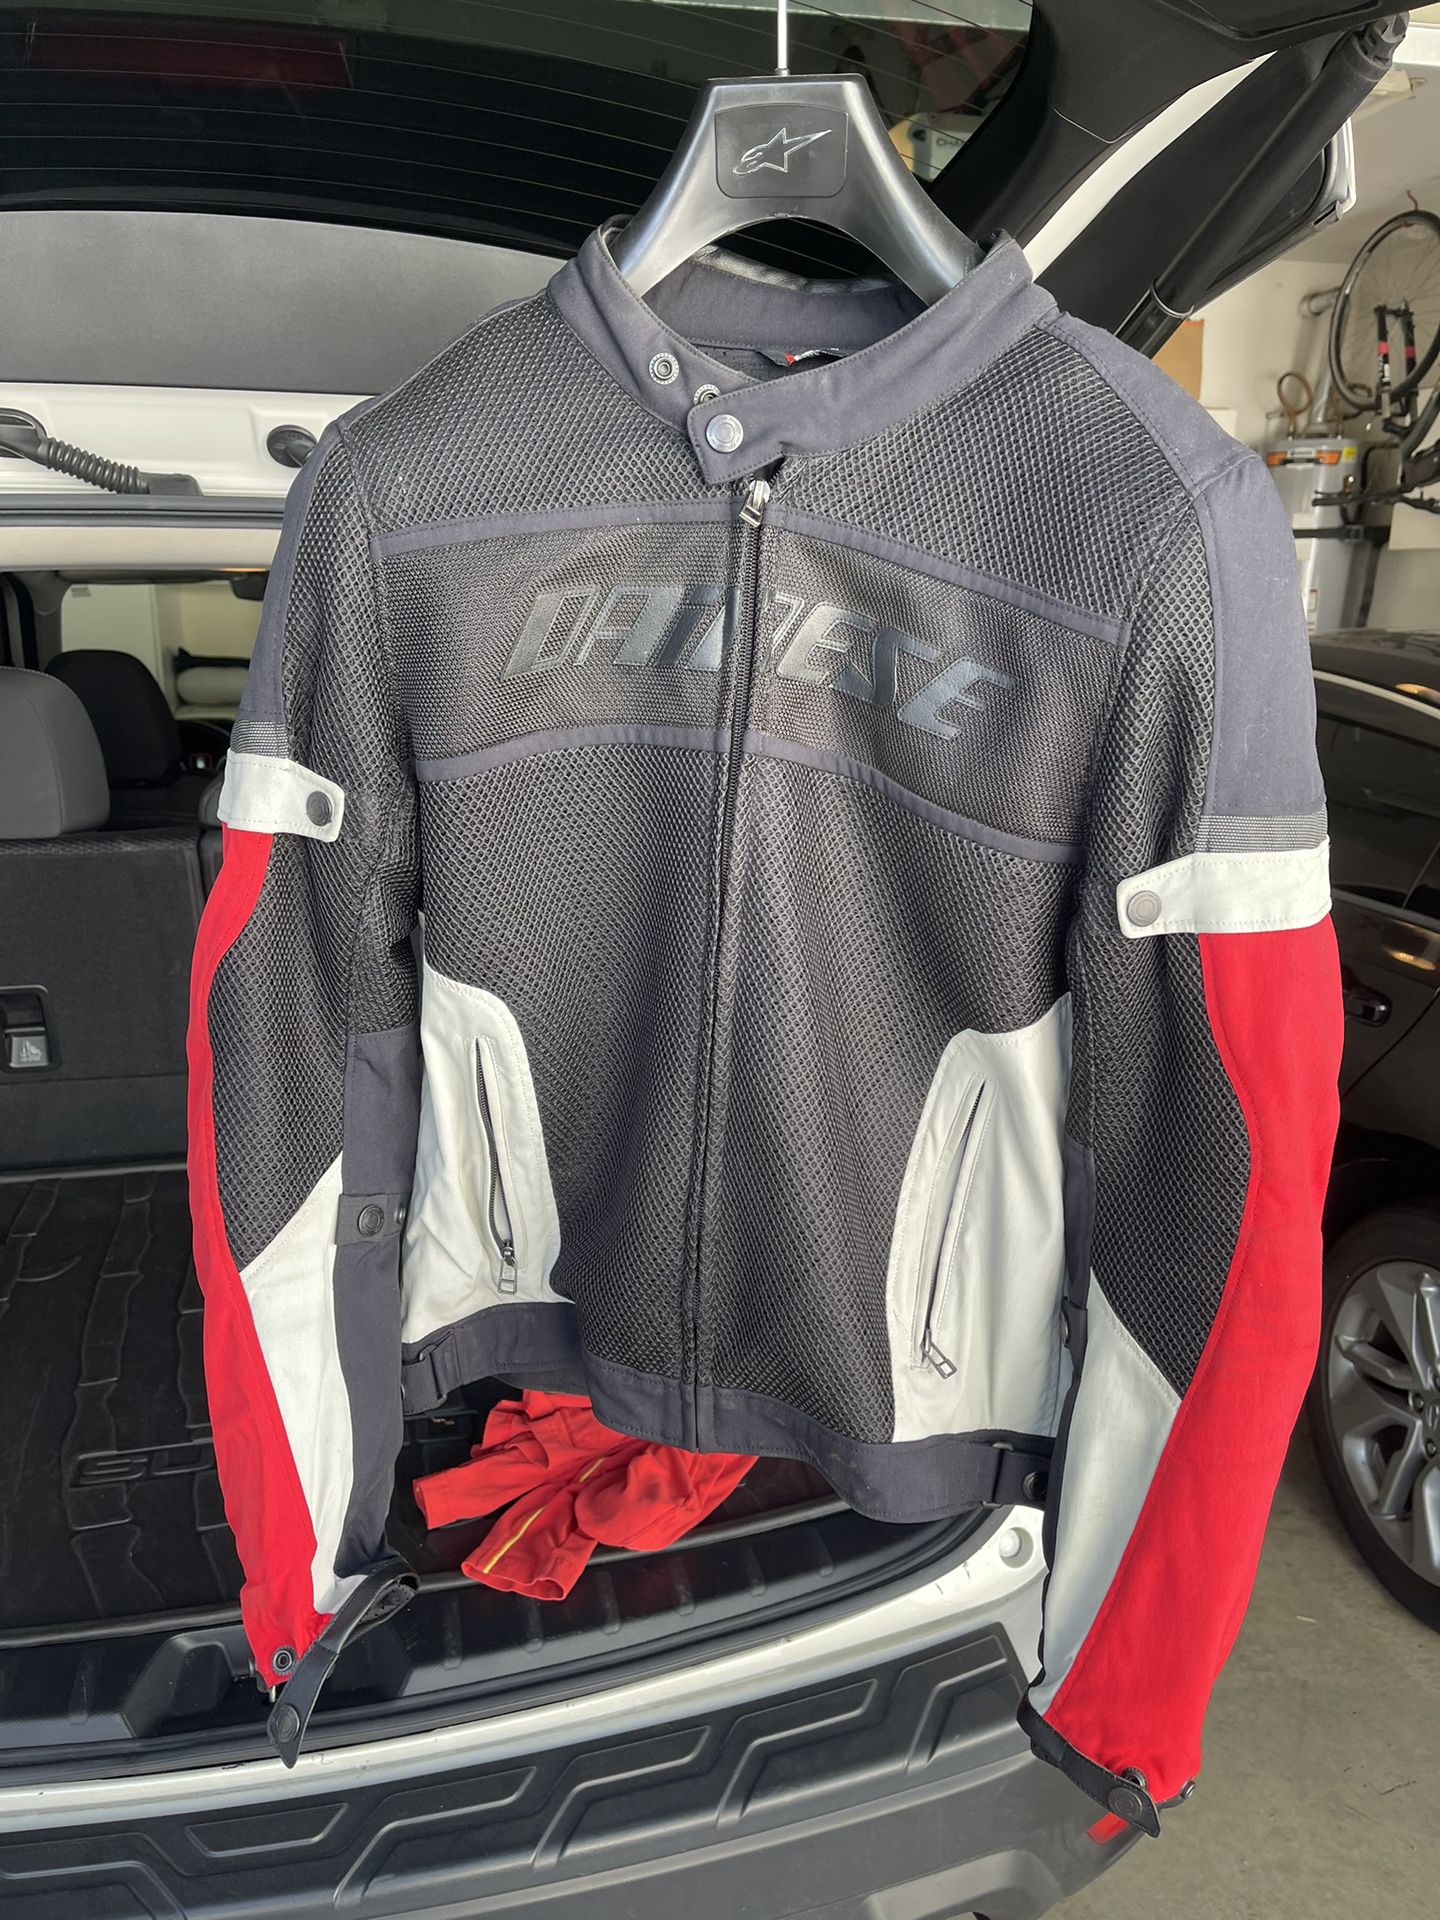 Dainese Summer Jacket and Pants